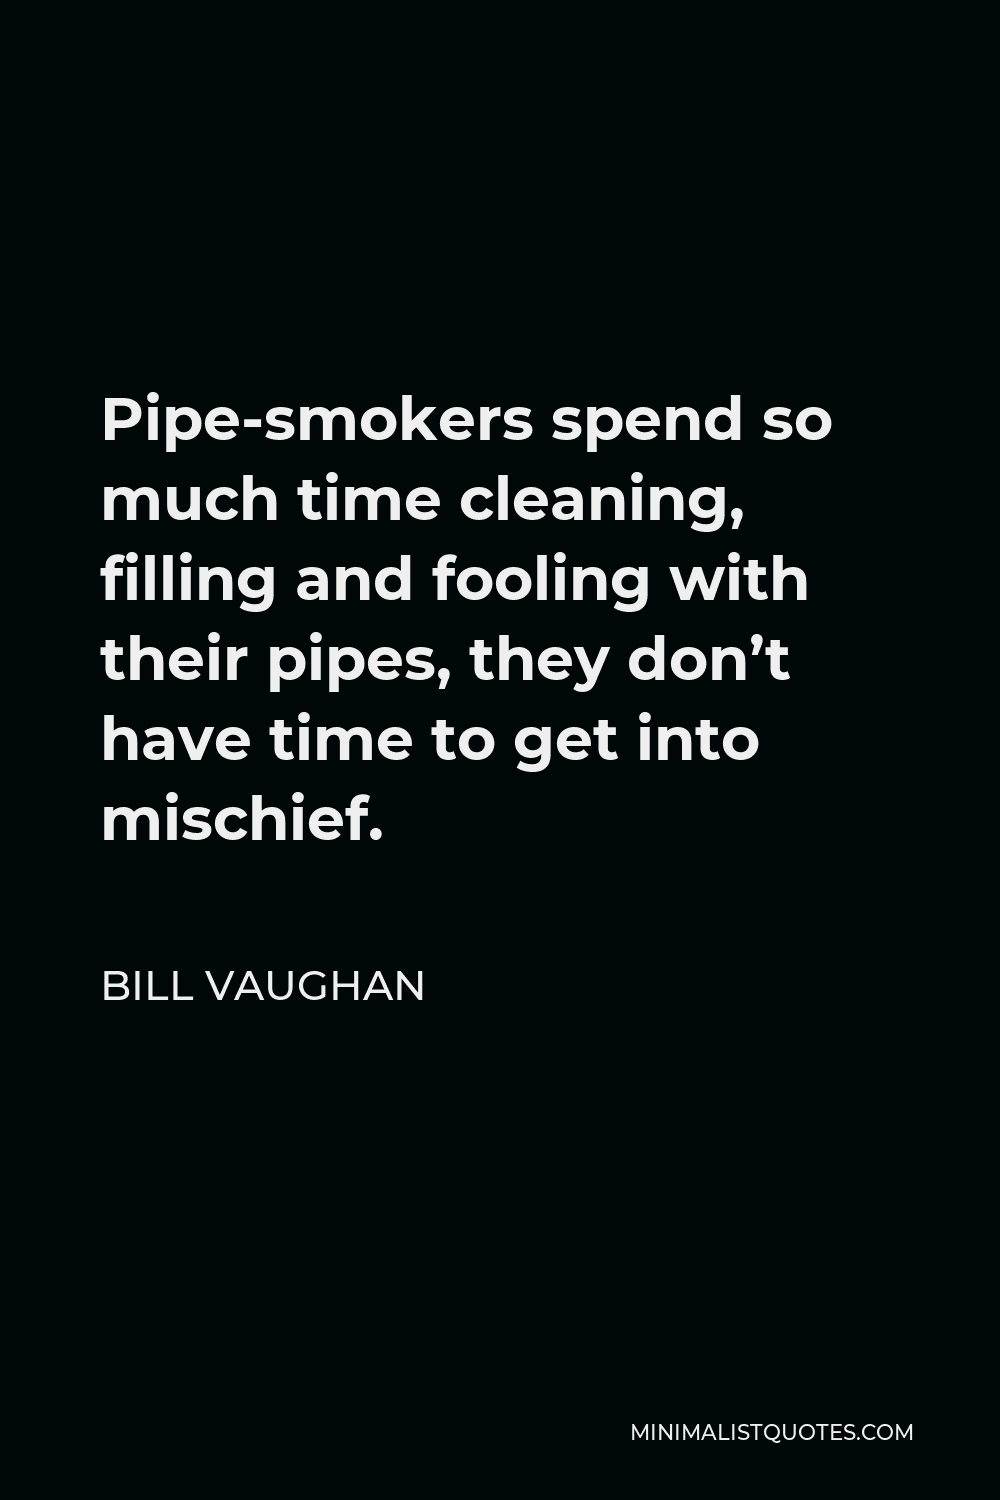 Bill Vaughan Quote - Pipe-smokers spend so much time cleaning, filling and fooling with their pipes, they don’t have time to get into mischief.